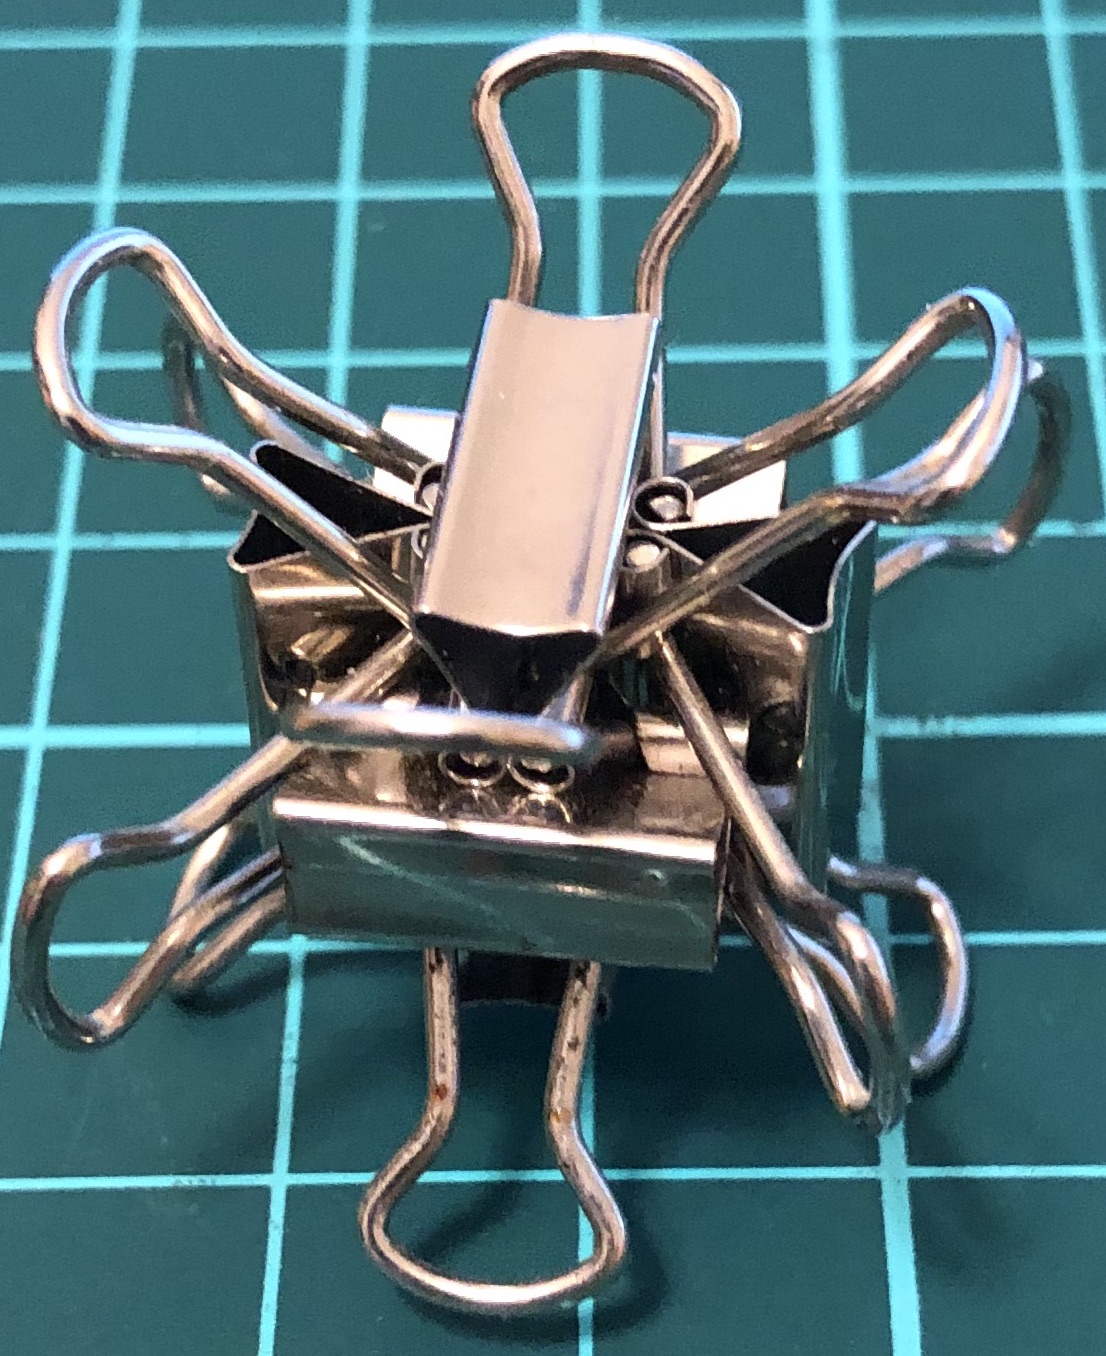 6 binder clips with spiky handles